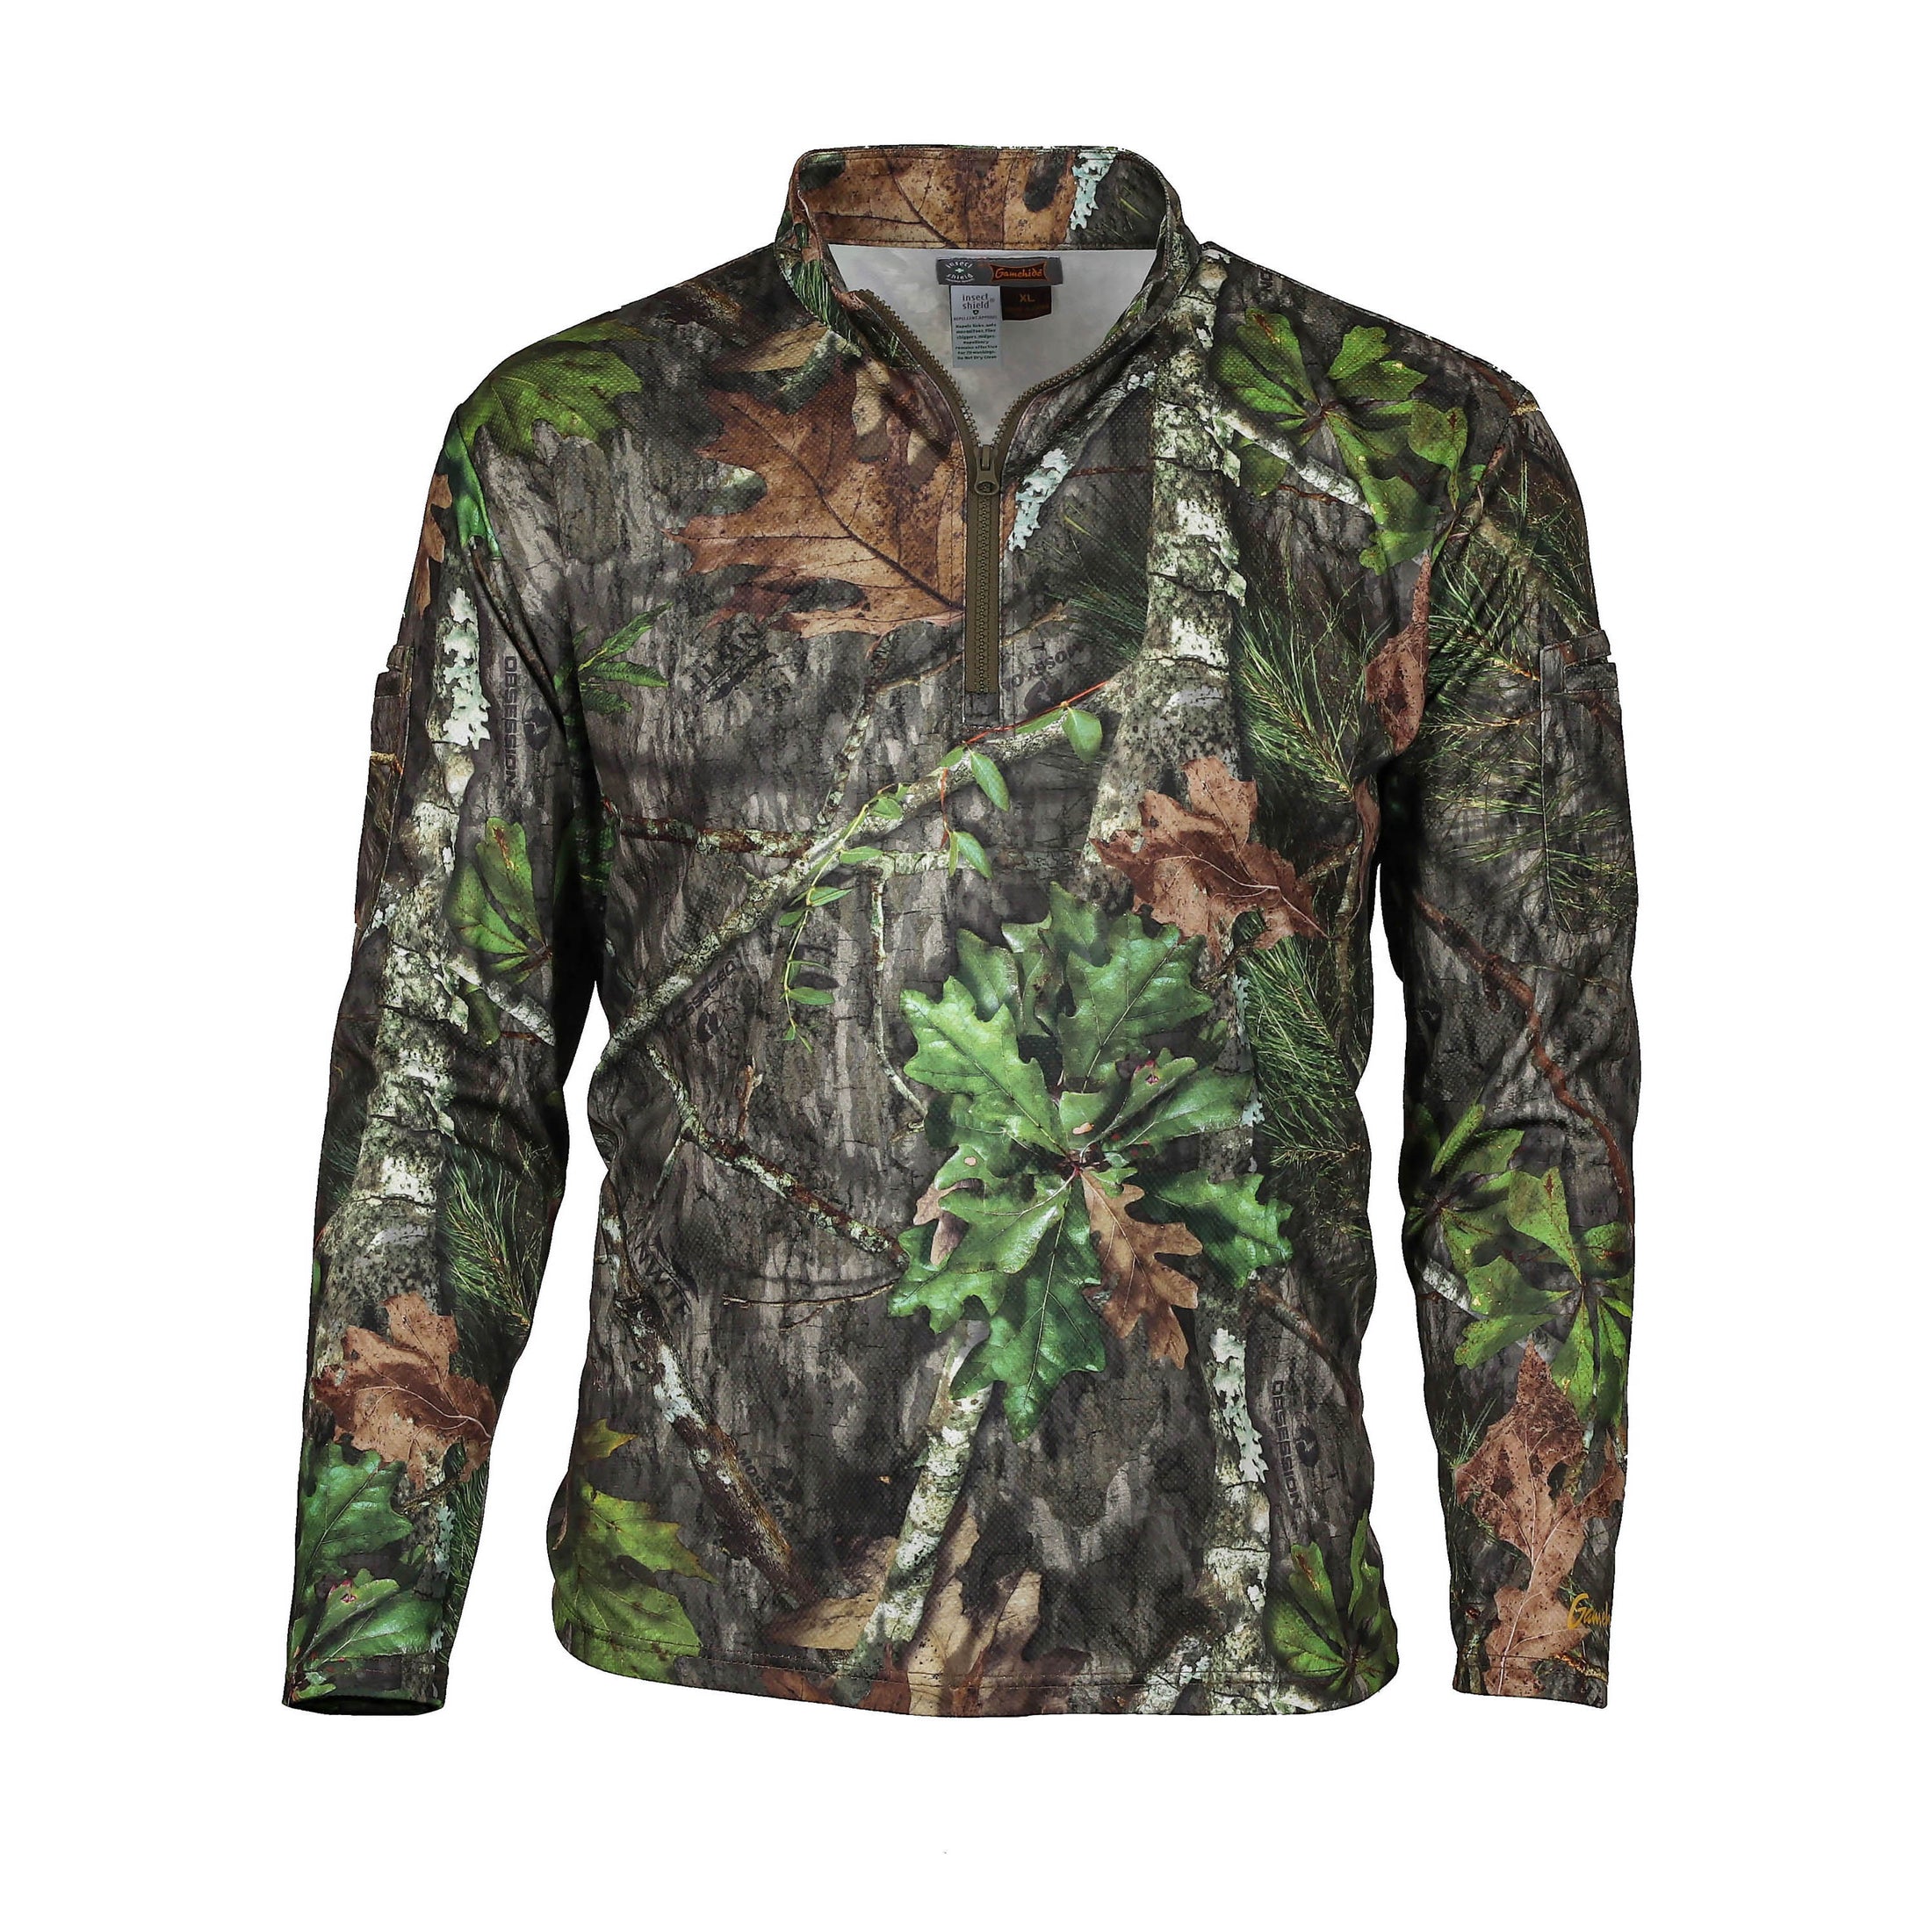 gamehide ElimiTick Tactical Style Quarter Zip Long Sleeve Shirt front (mossy oak obsession)